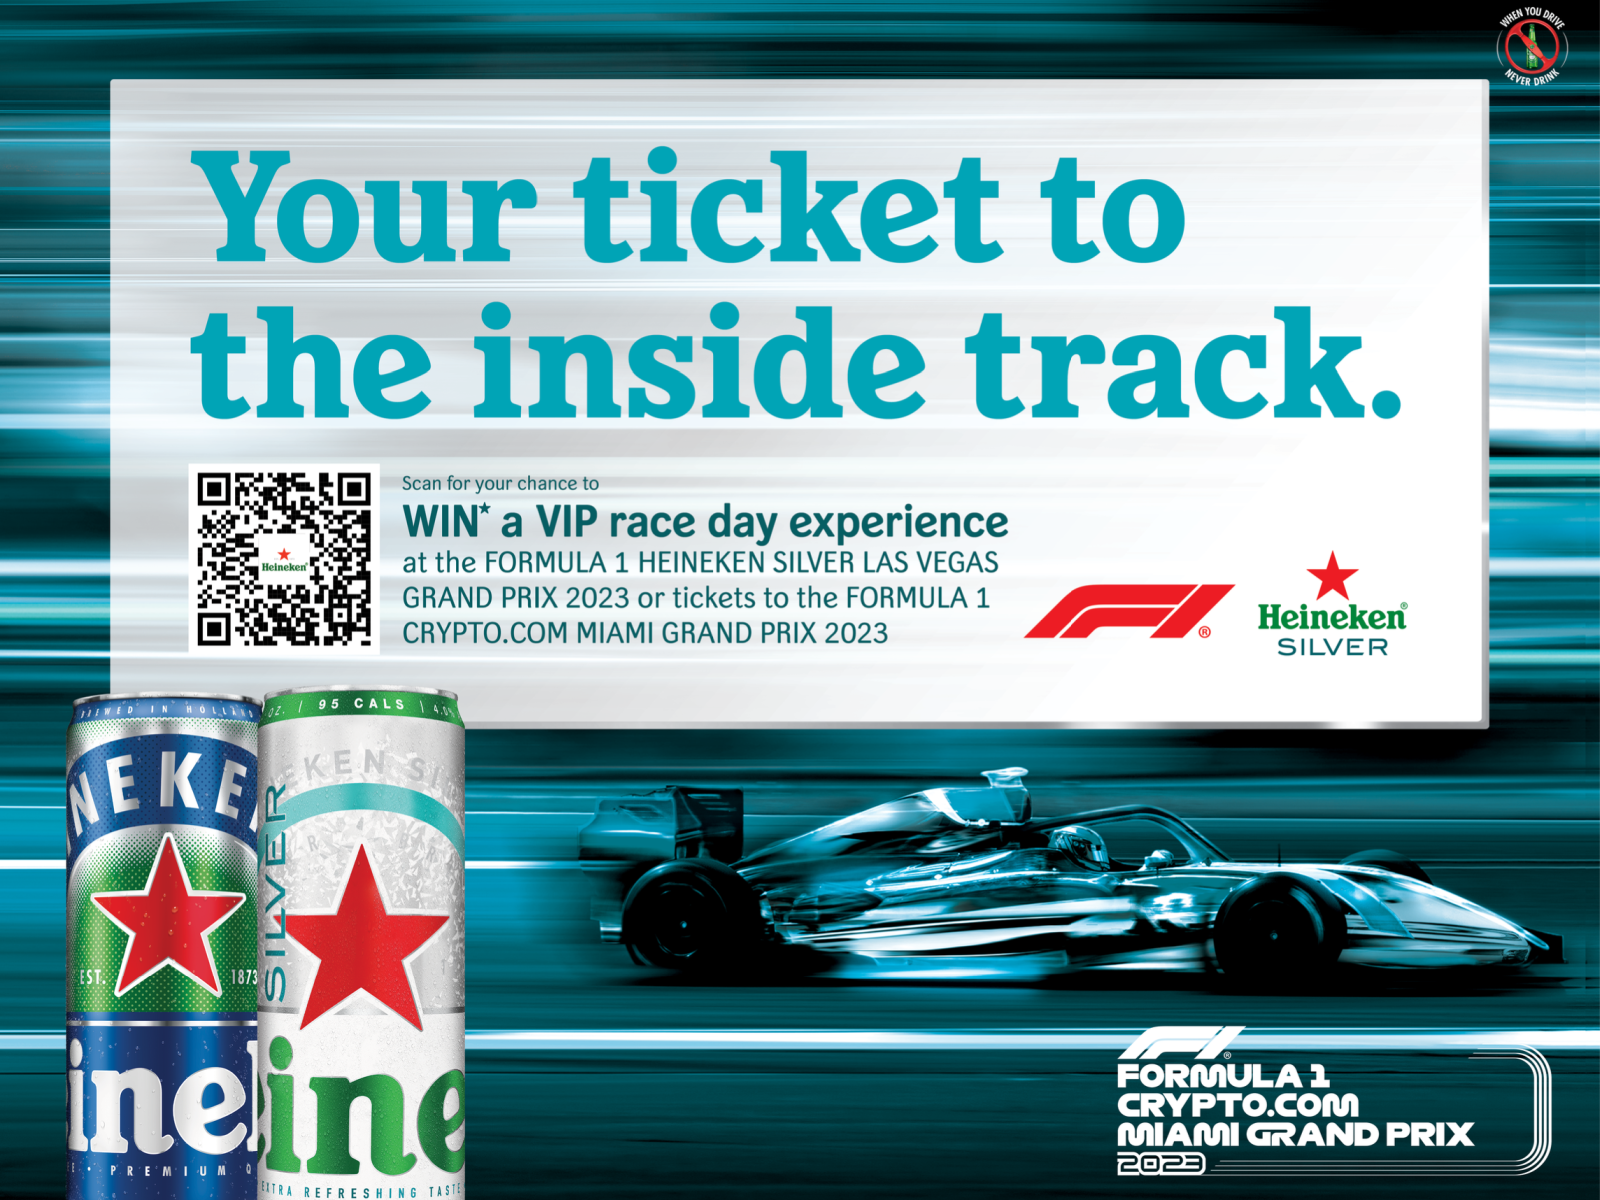 Heineken Accelerates With the Launch of Heineken® Silver – Now Available at Publix – Plus Enter To Win Tickets To A Grand Prix Experience